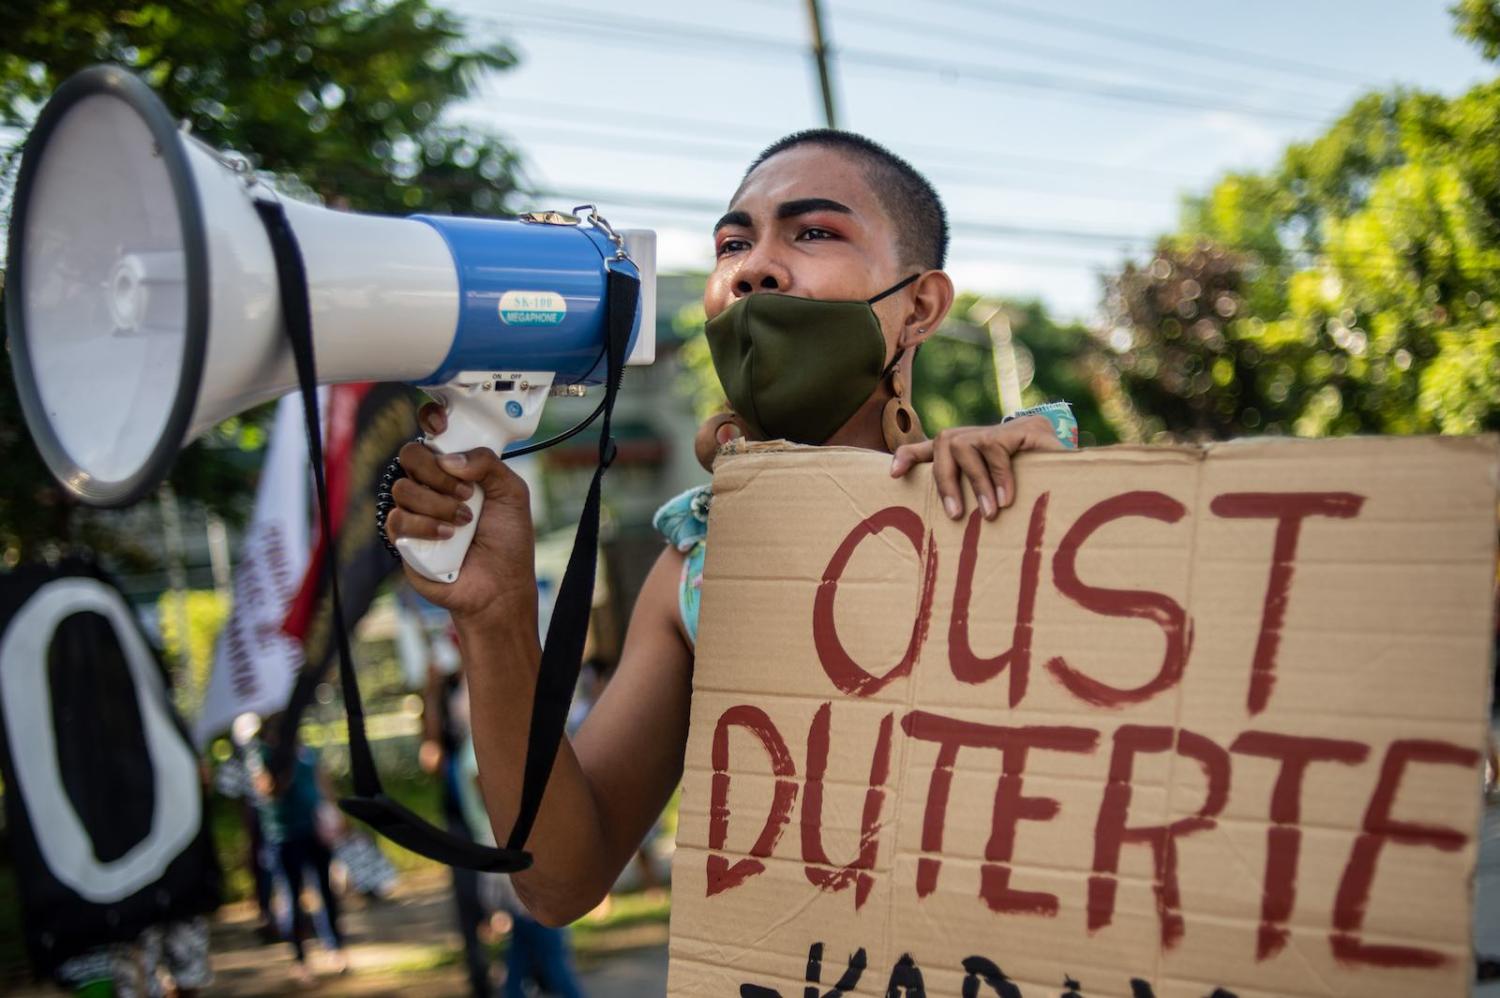 A protester in a demonstration ahead of President Rodrigo Duterte’s State of the Nation Address in Quezon City, Philippines, 27 July 2020 (Lisa Marie David/NurPhoto via Getty Images)